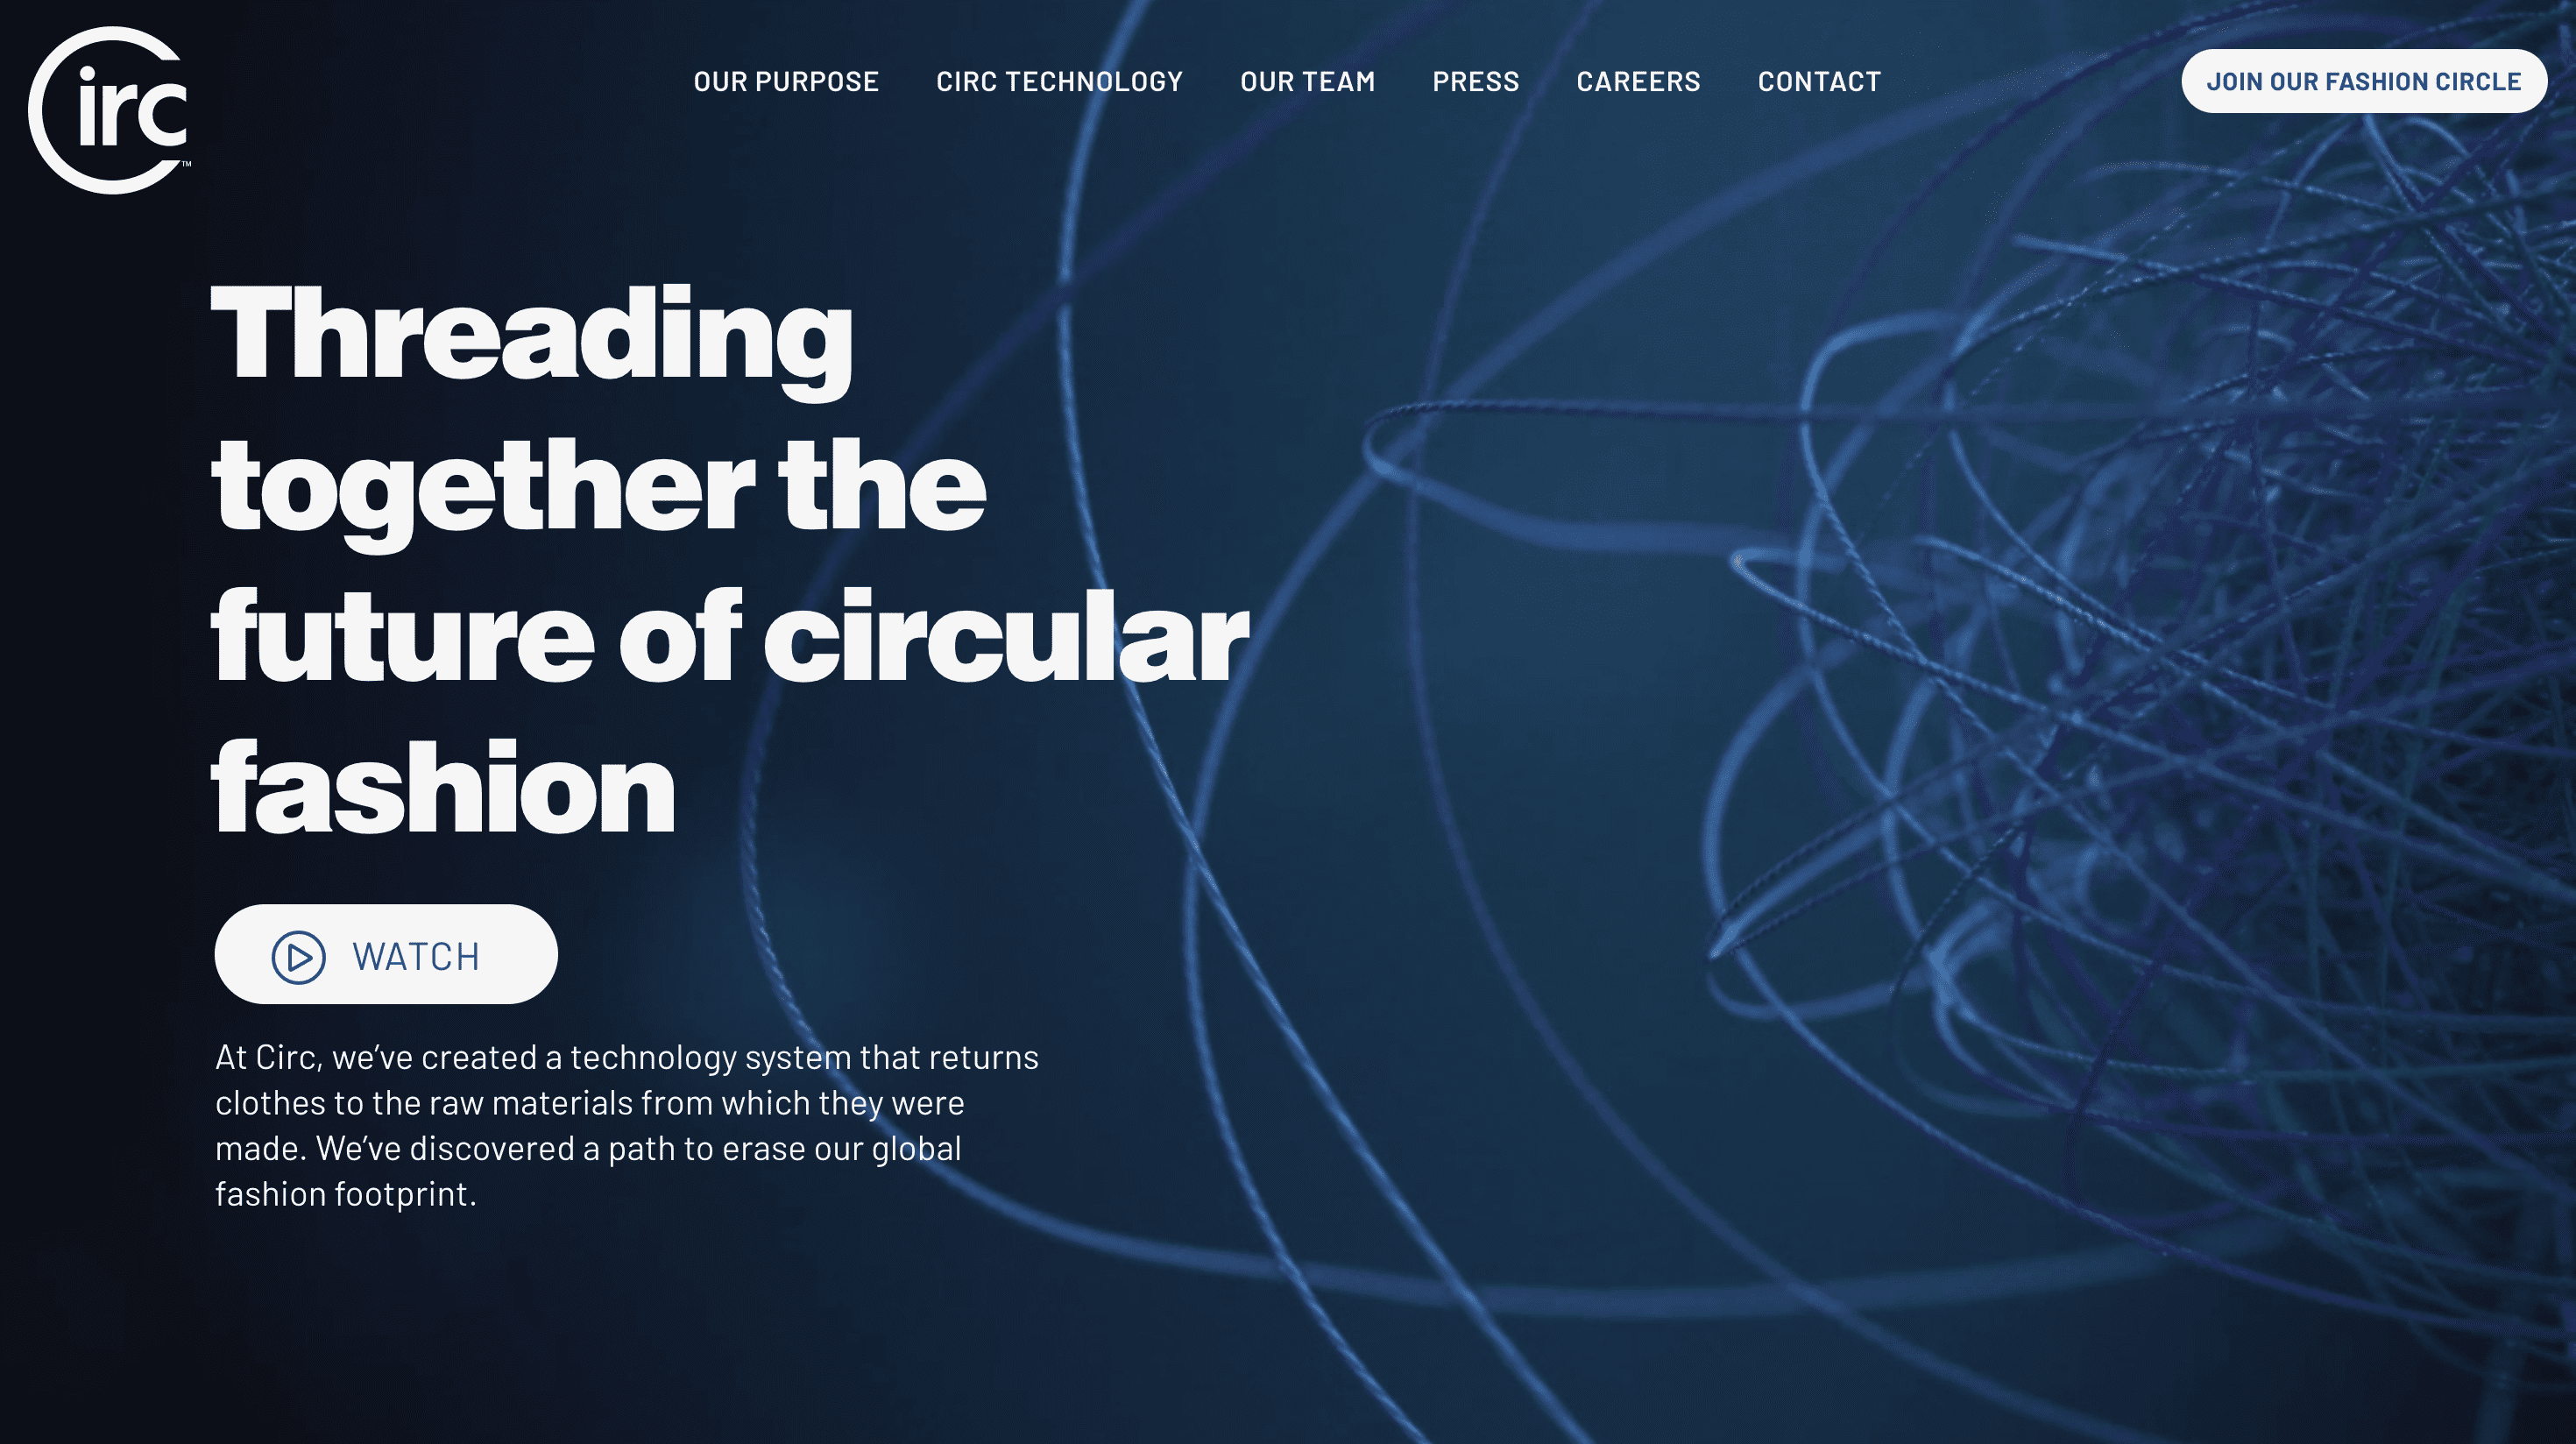 US Circular Fashion Startup Circ Raises $25 Million in New Funding Round for Recyclable Polyester-Cotton Blend Fabric Separation and Recycling